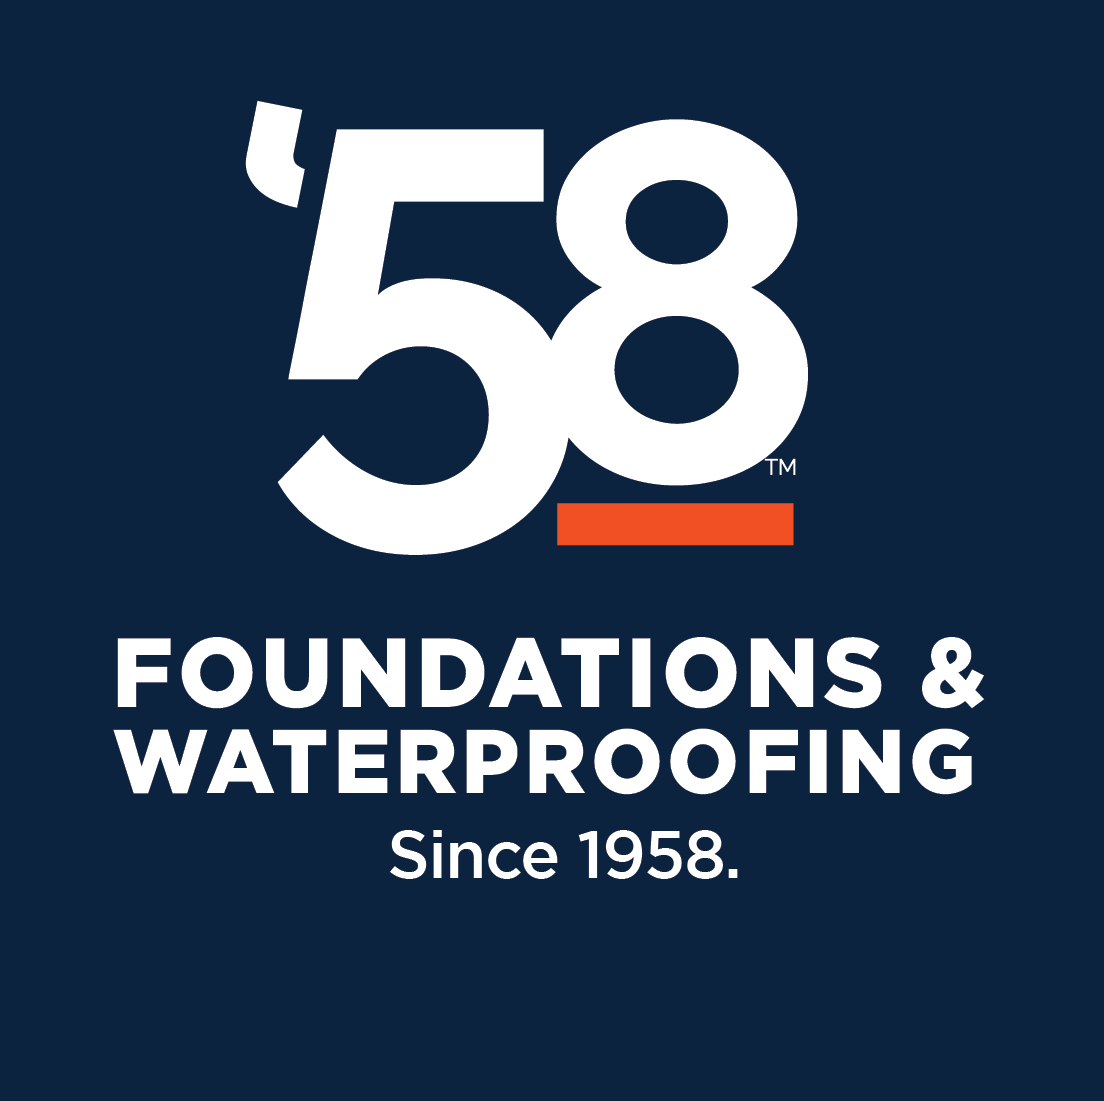 ‘58 Foundations & Waterproofing Named Winner of the Top Workplaces USA 2023 Award